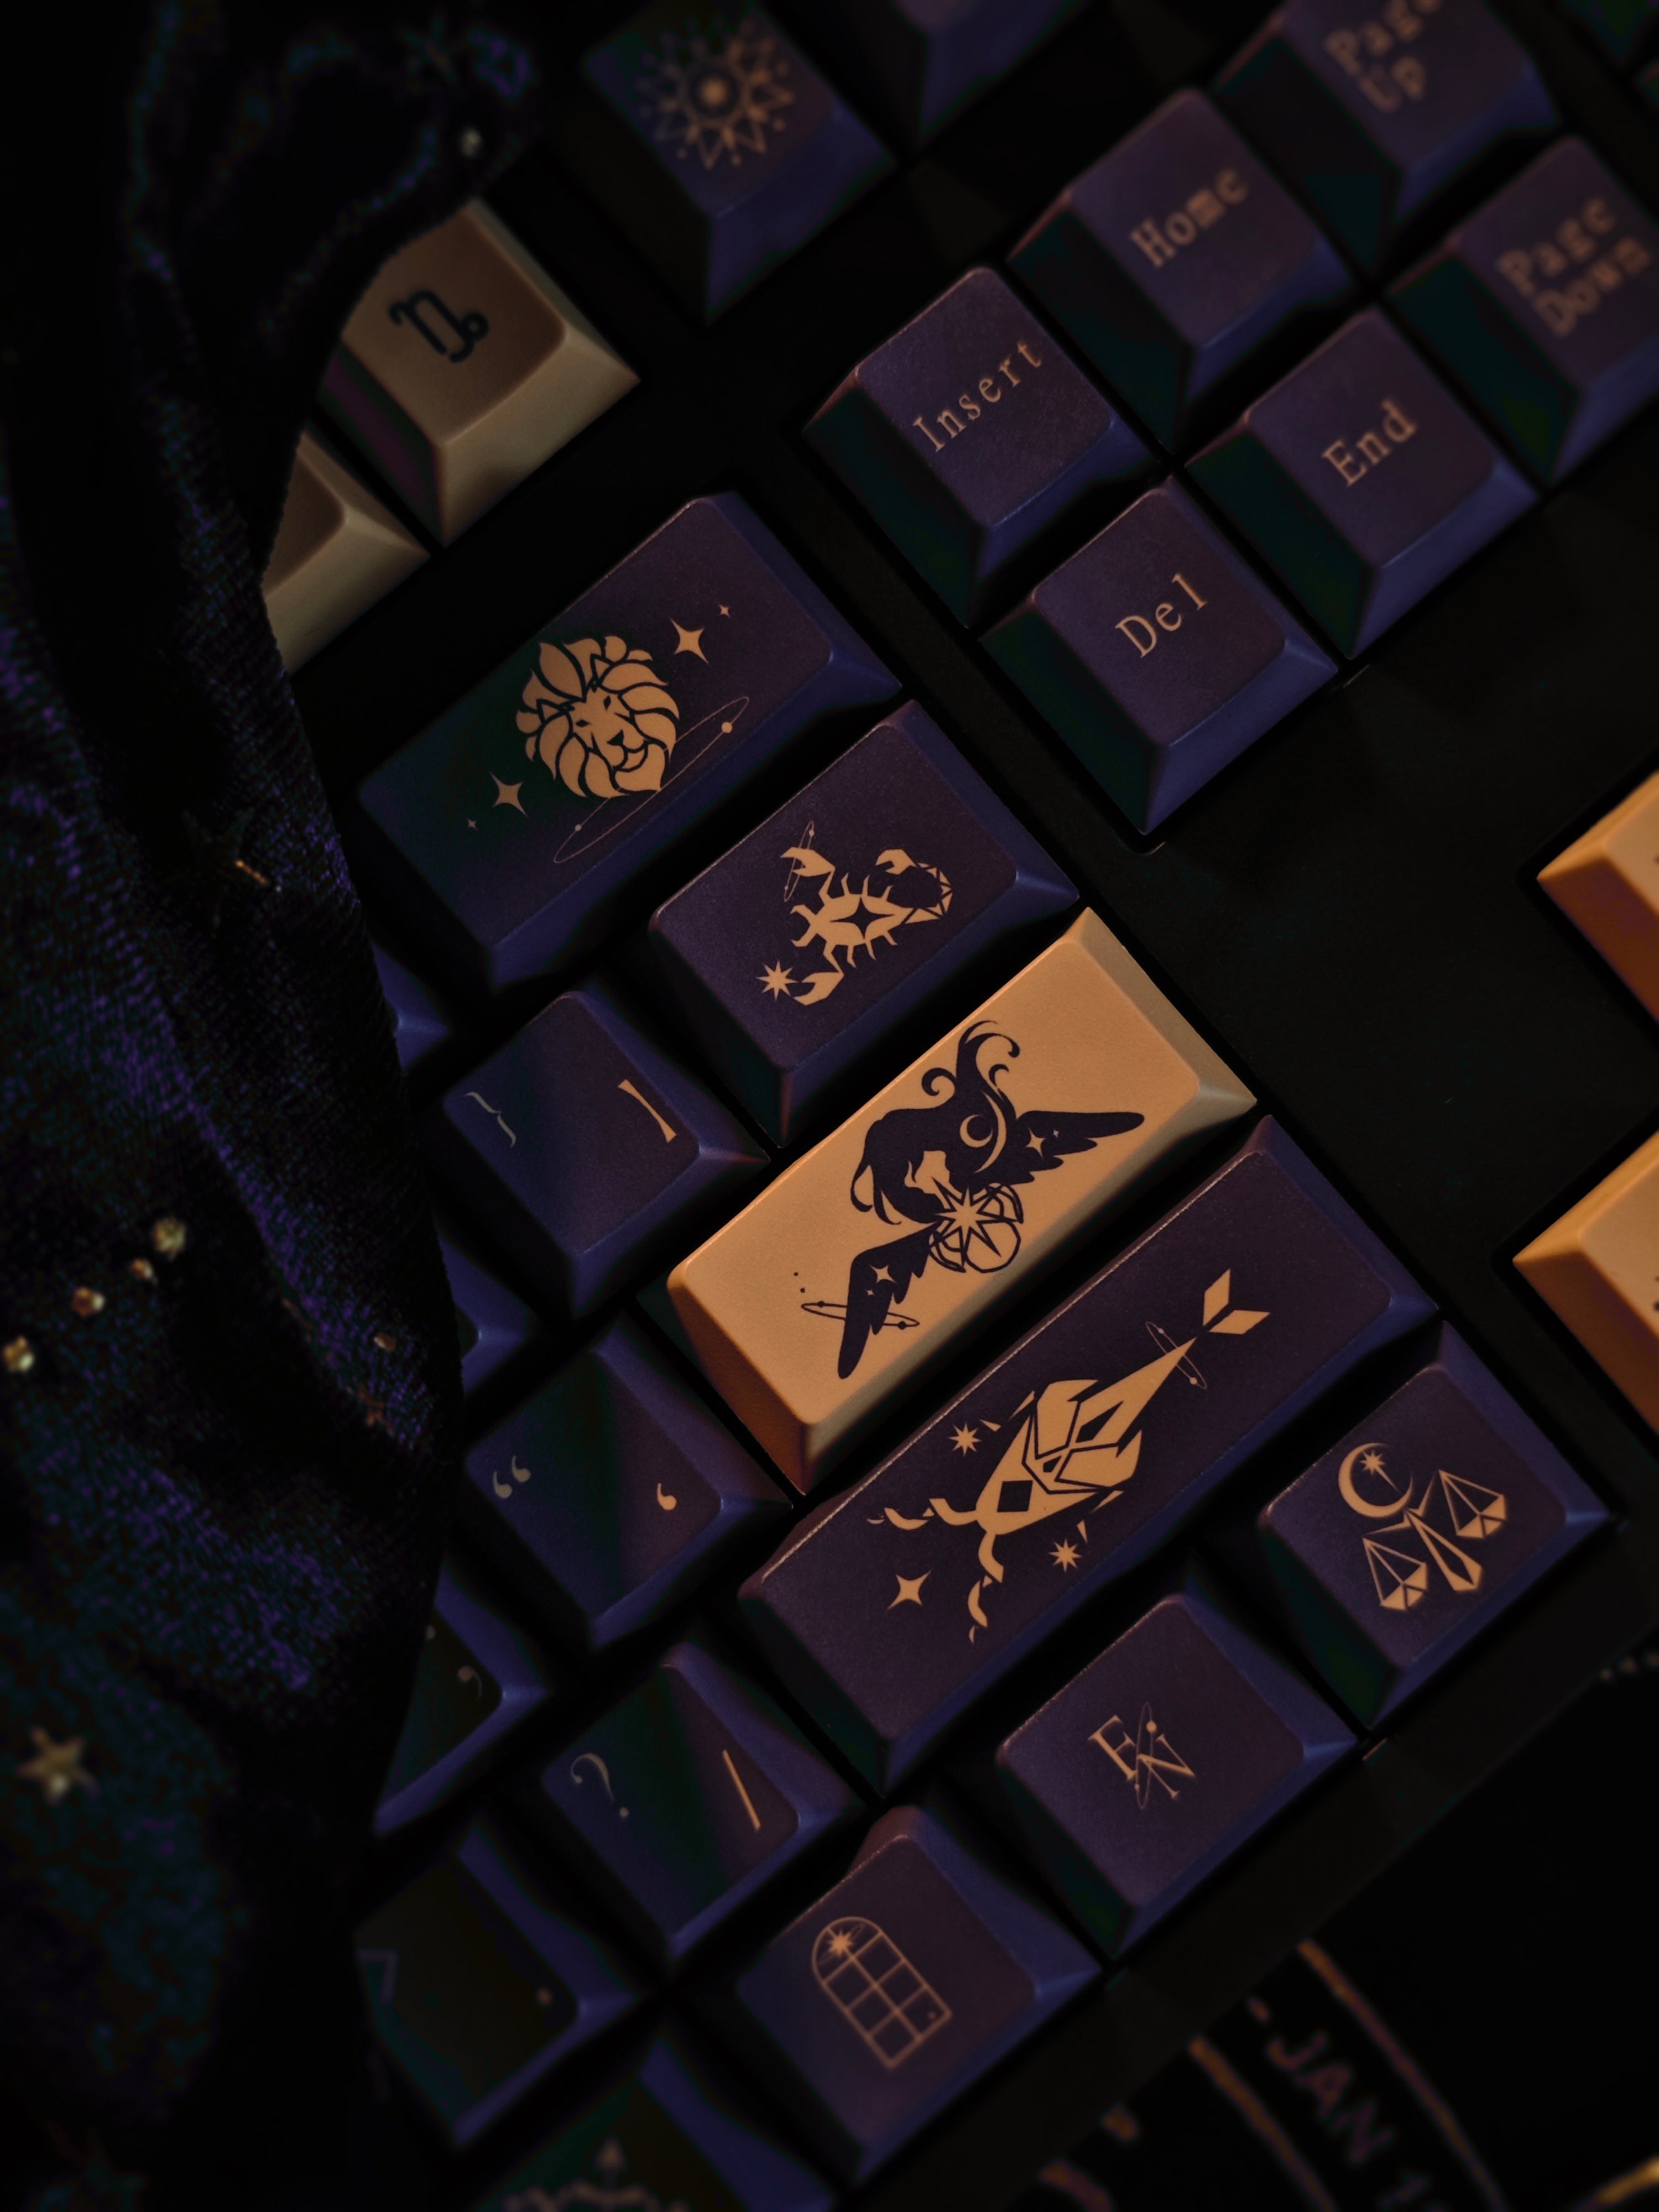 Explore the dye-sublimation keycap process: the perfect collision of personalization and quality